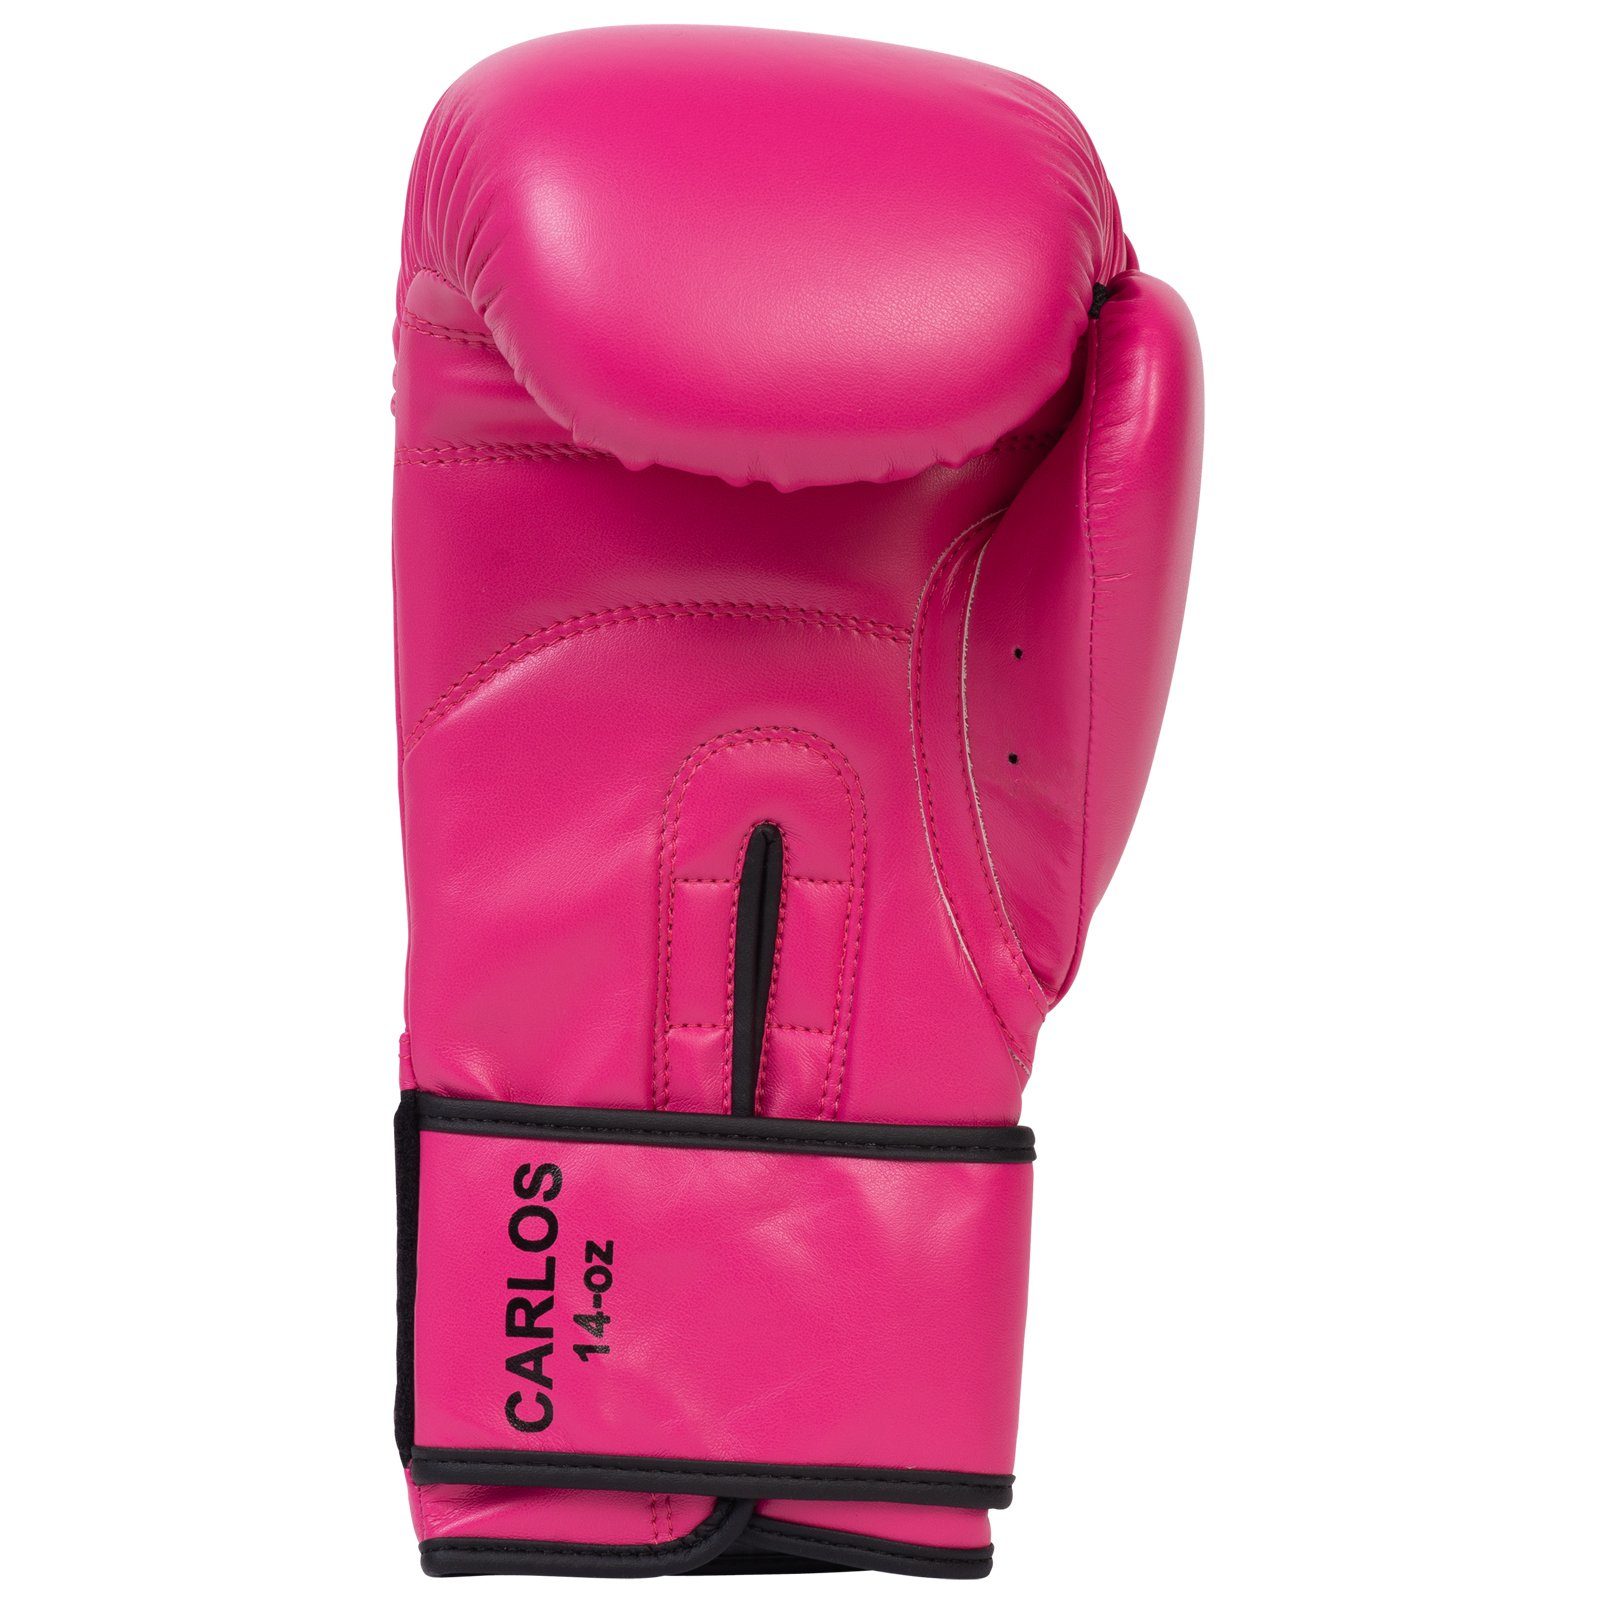 Benlee CARLOS Boxhandschuhe Rocky Marciano Pink